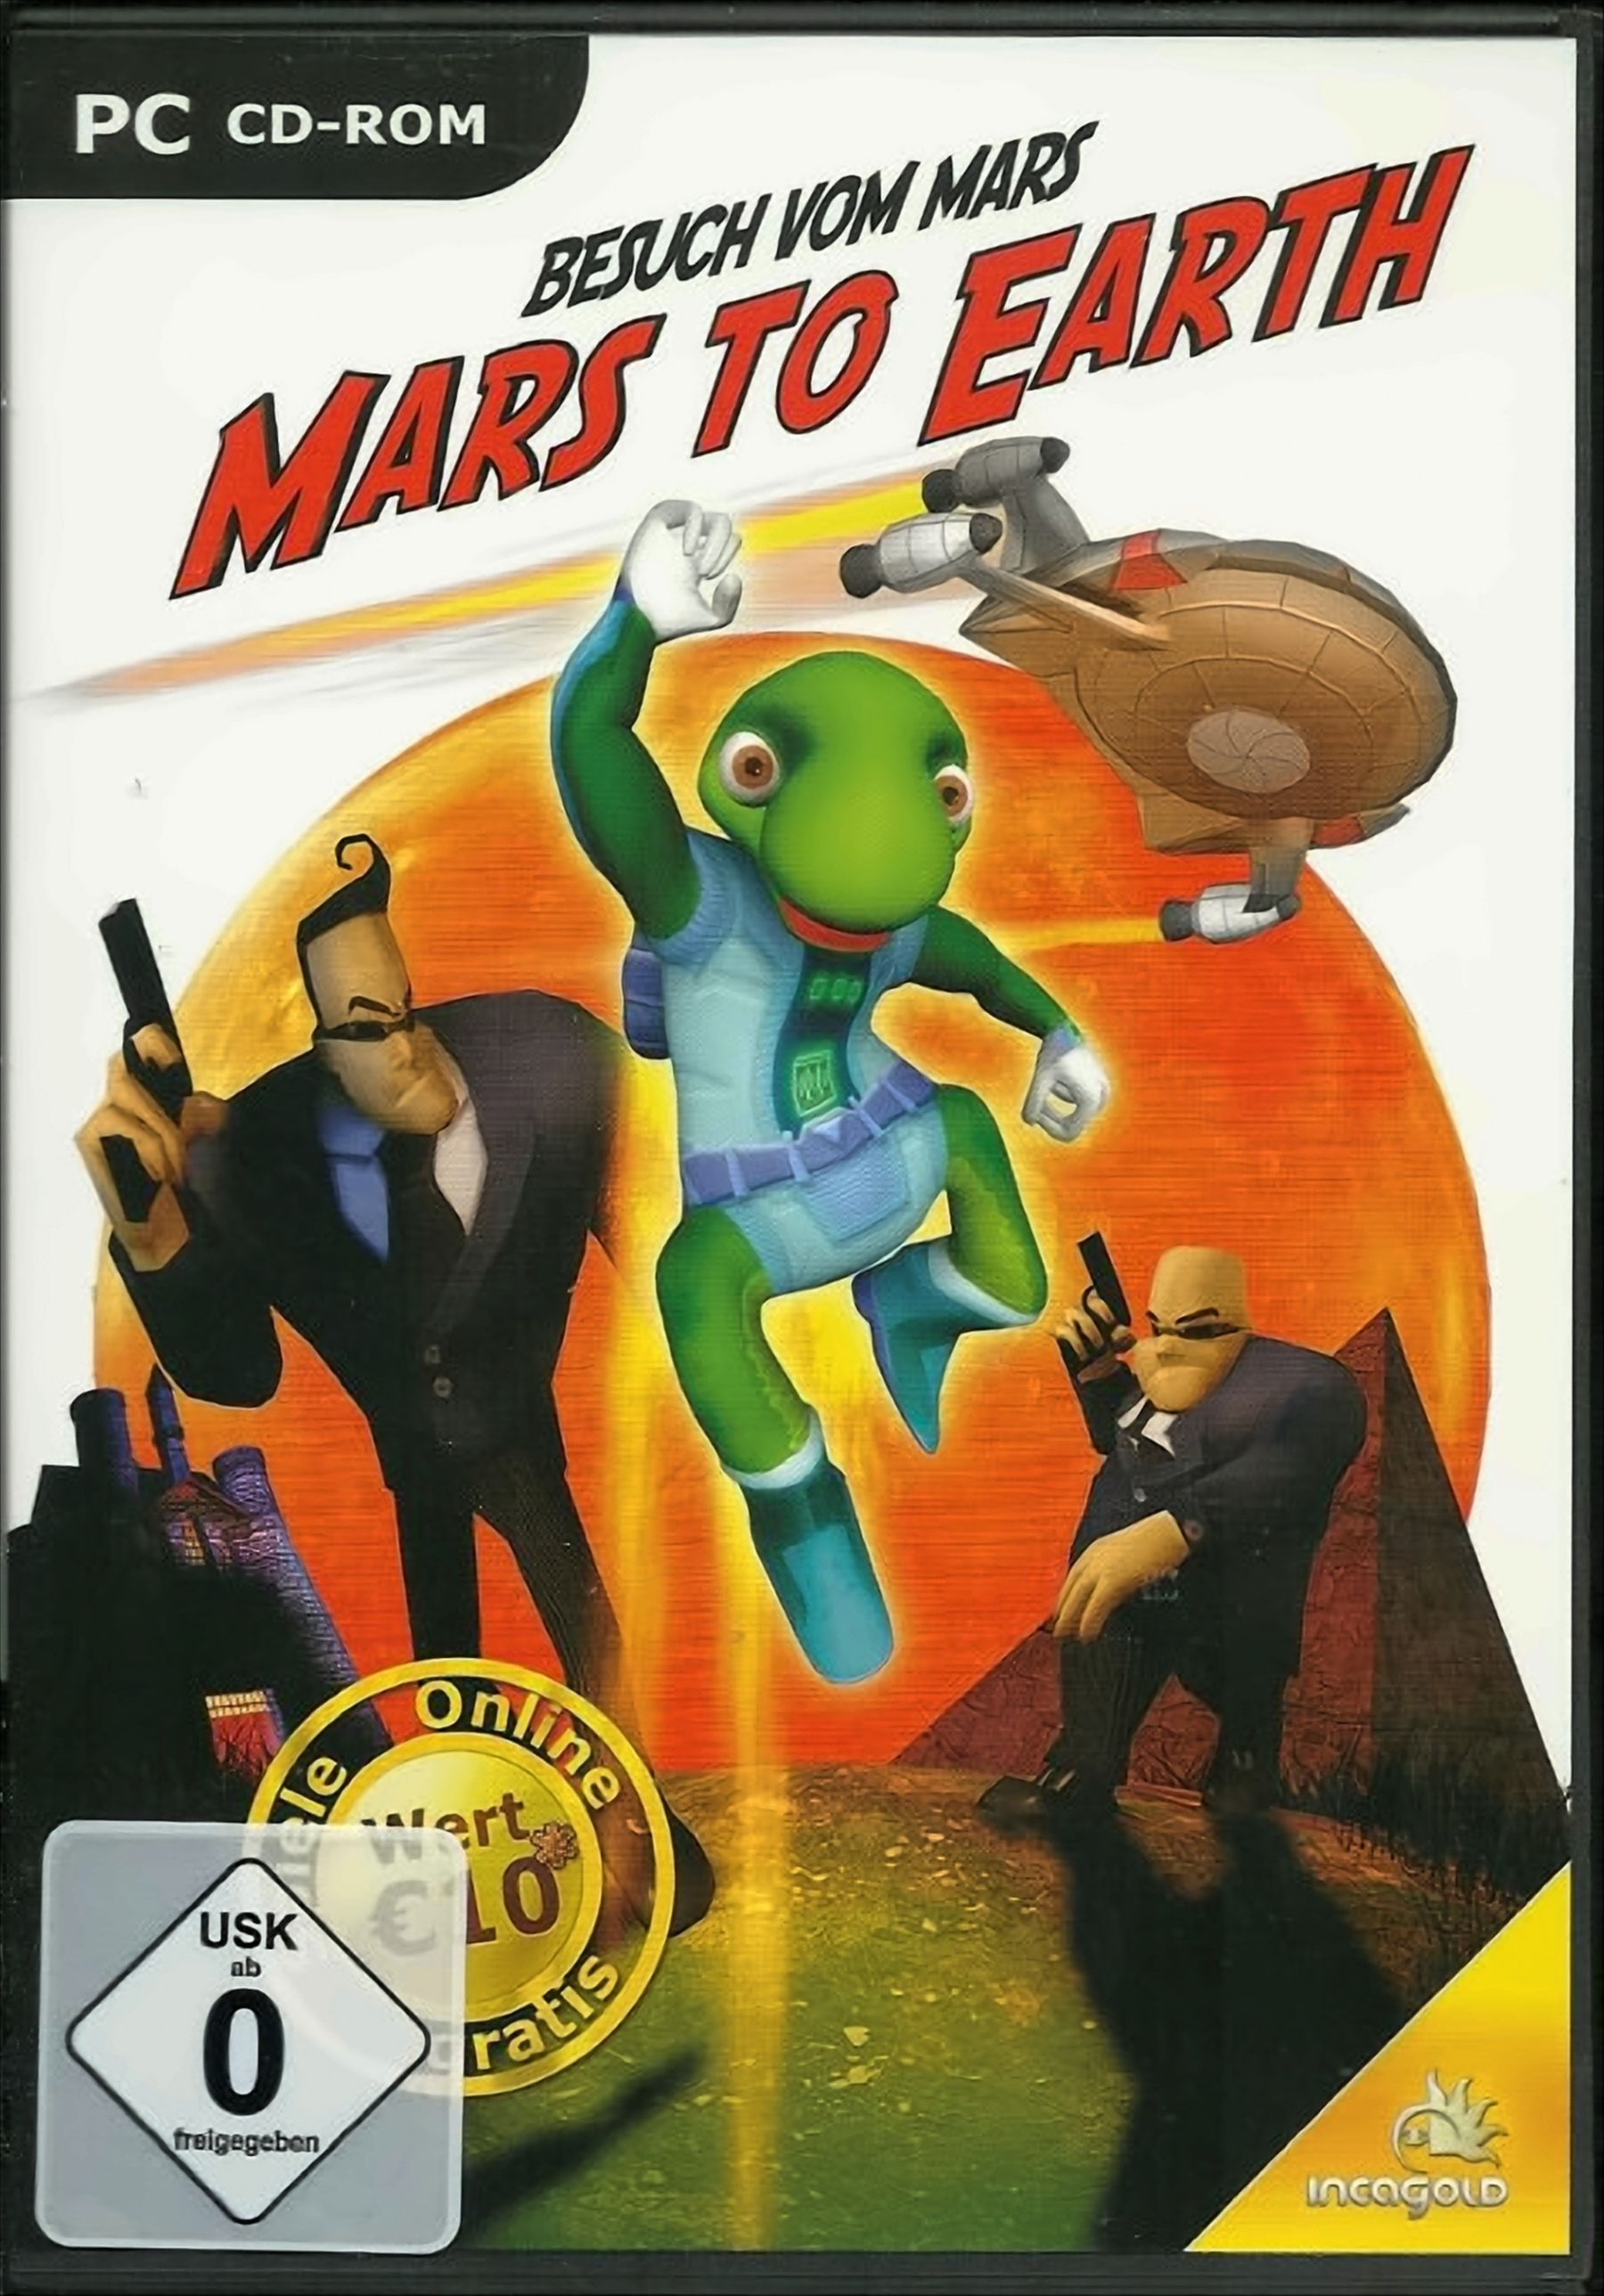 Mars to Earth - Besuch - vom [PC] Mars